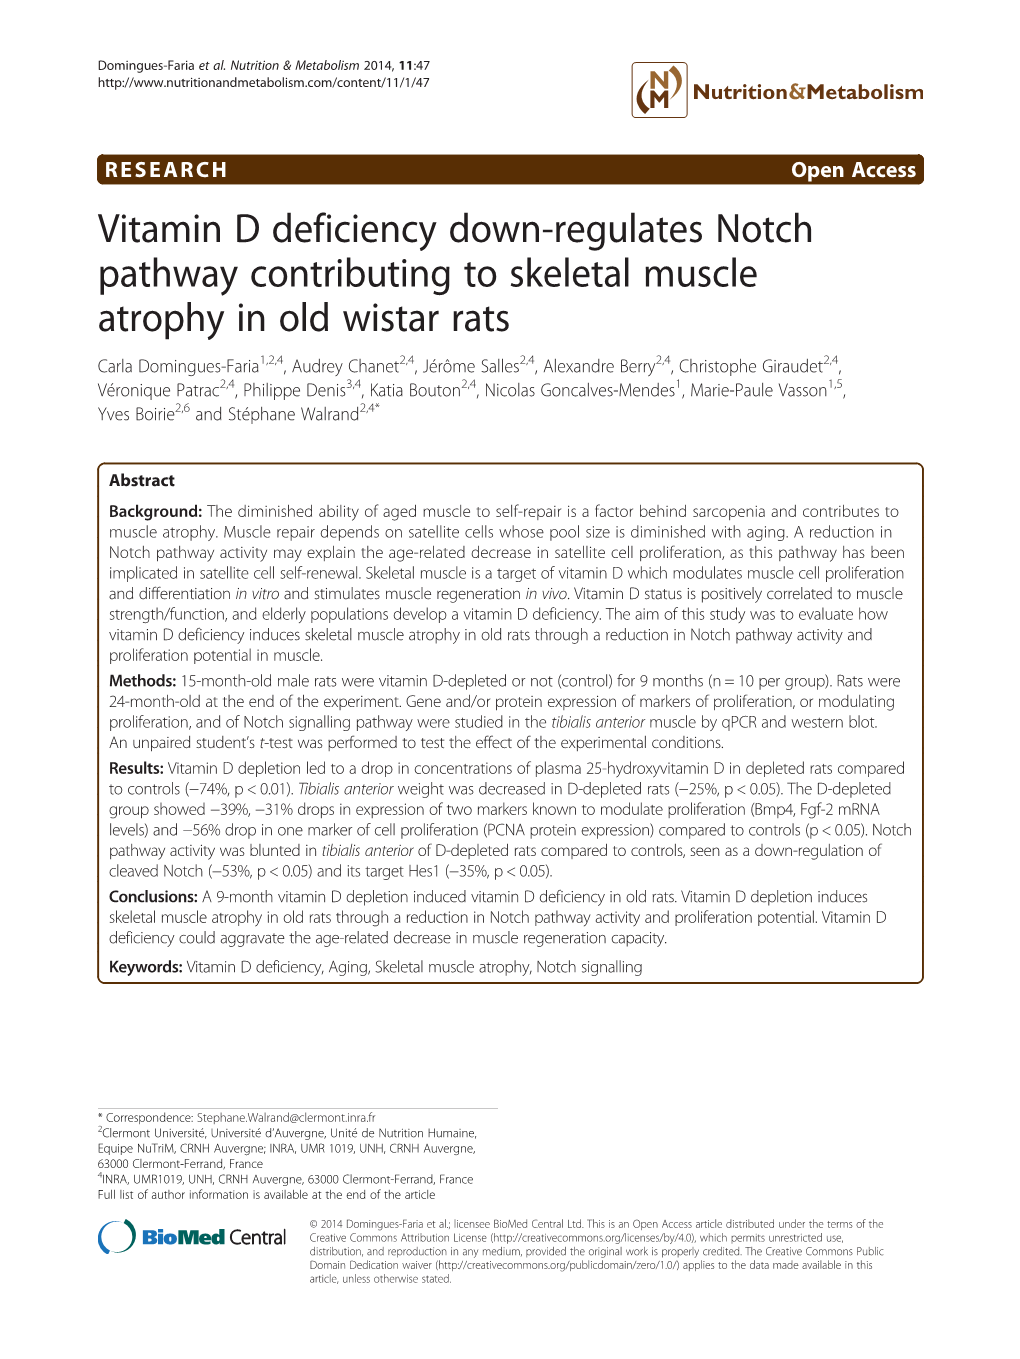 Vitamin D Deficiency Down-Regulates Notch Pathway Contributing To